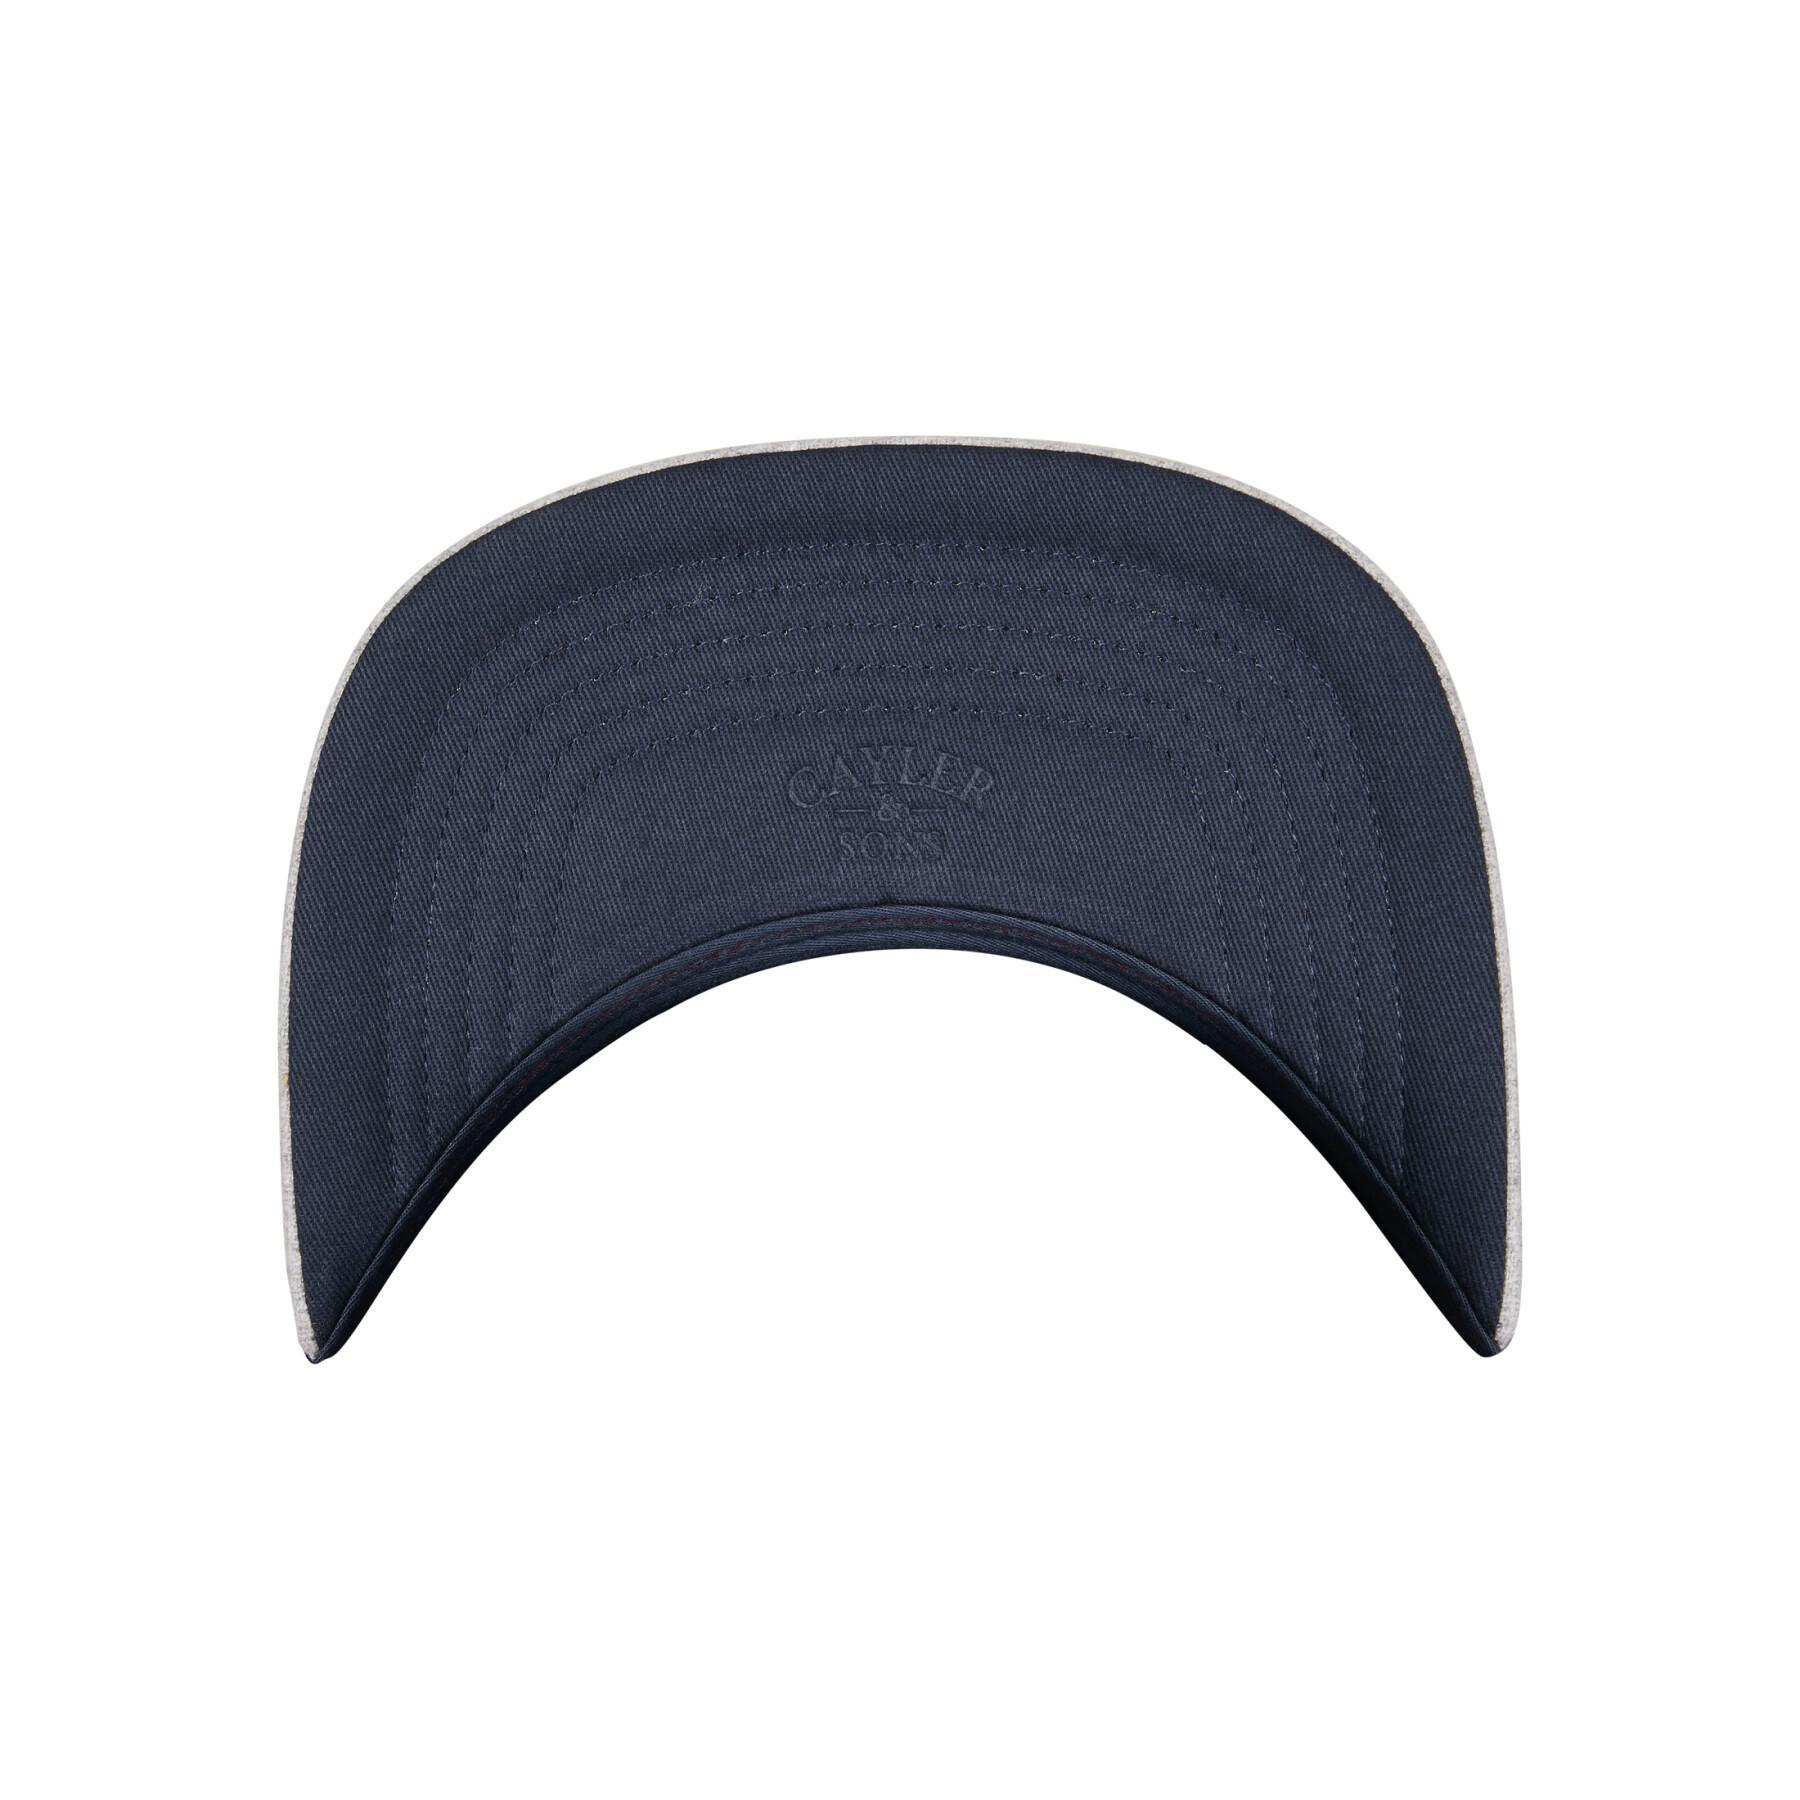 Casquette Cayler & Sons cl stand strong